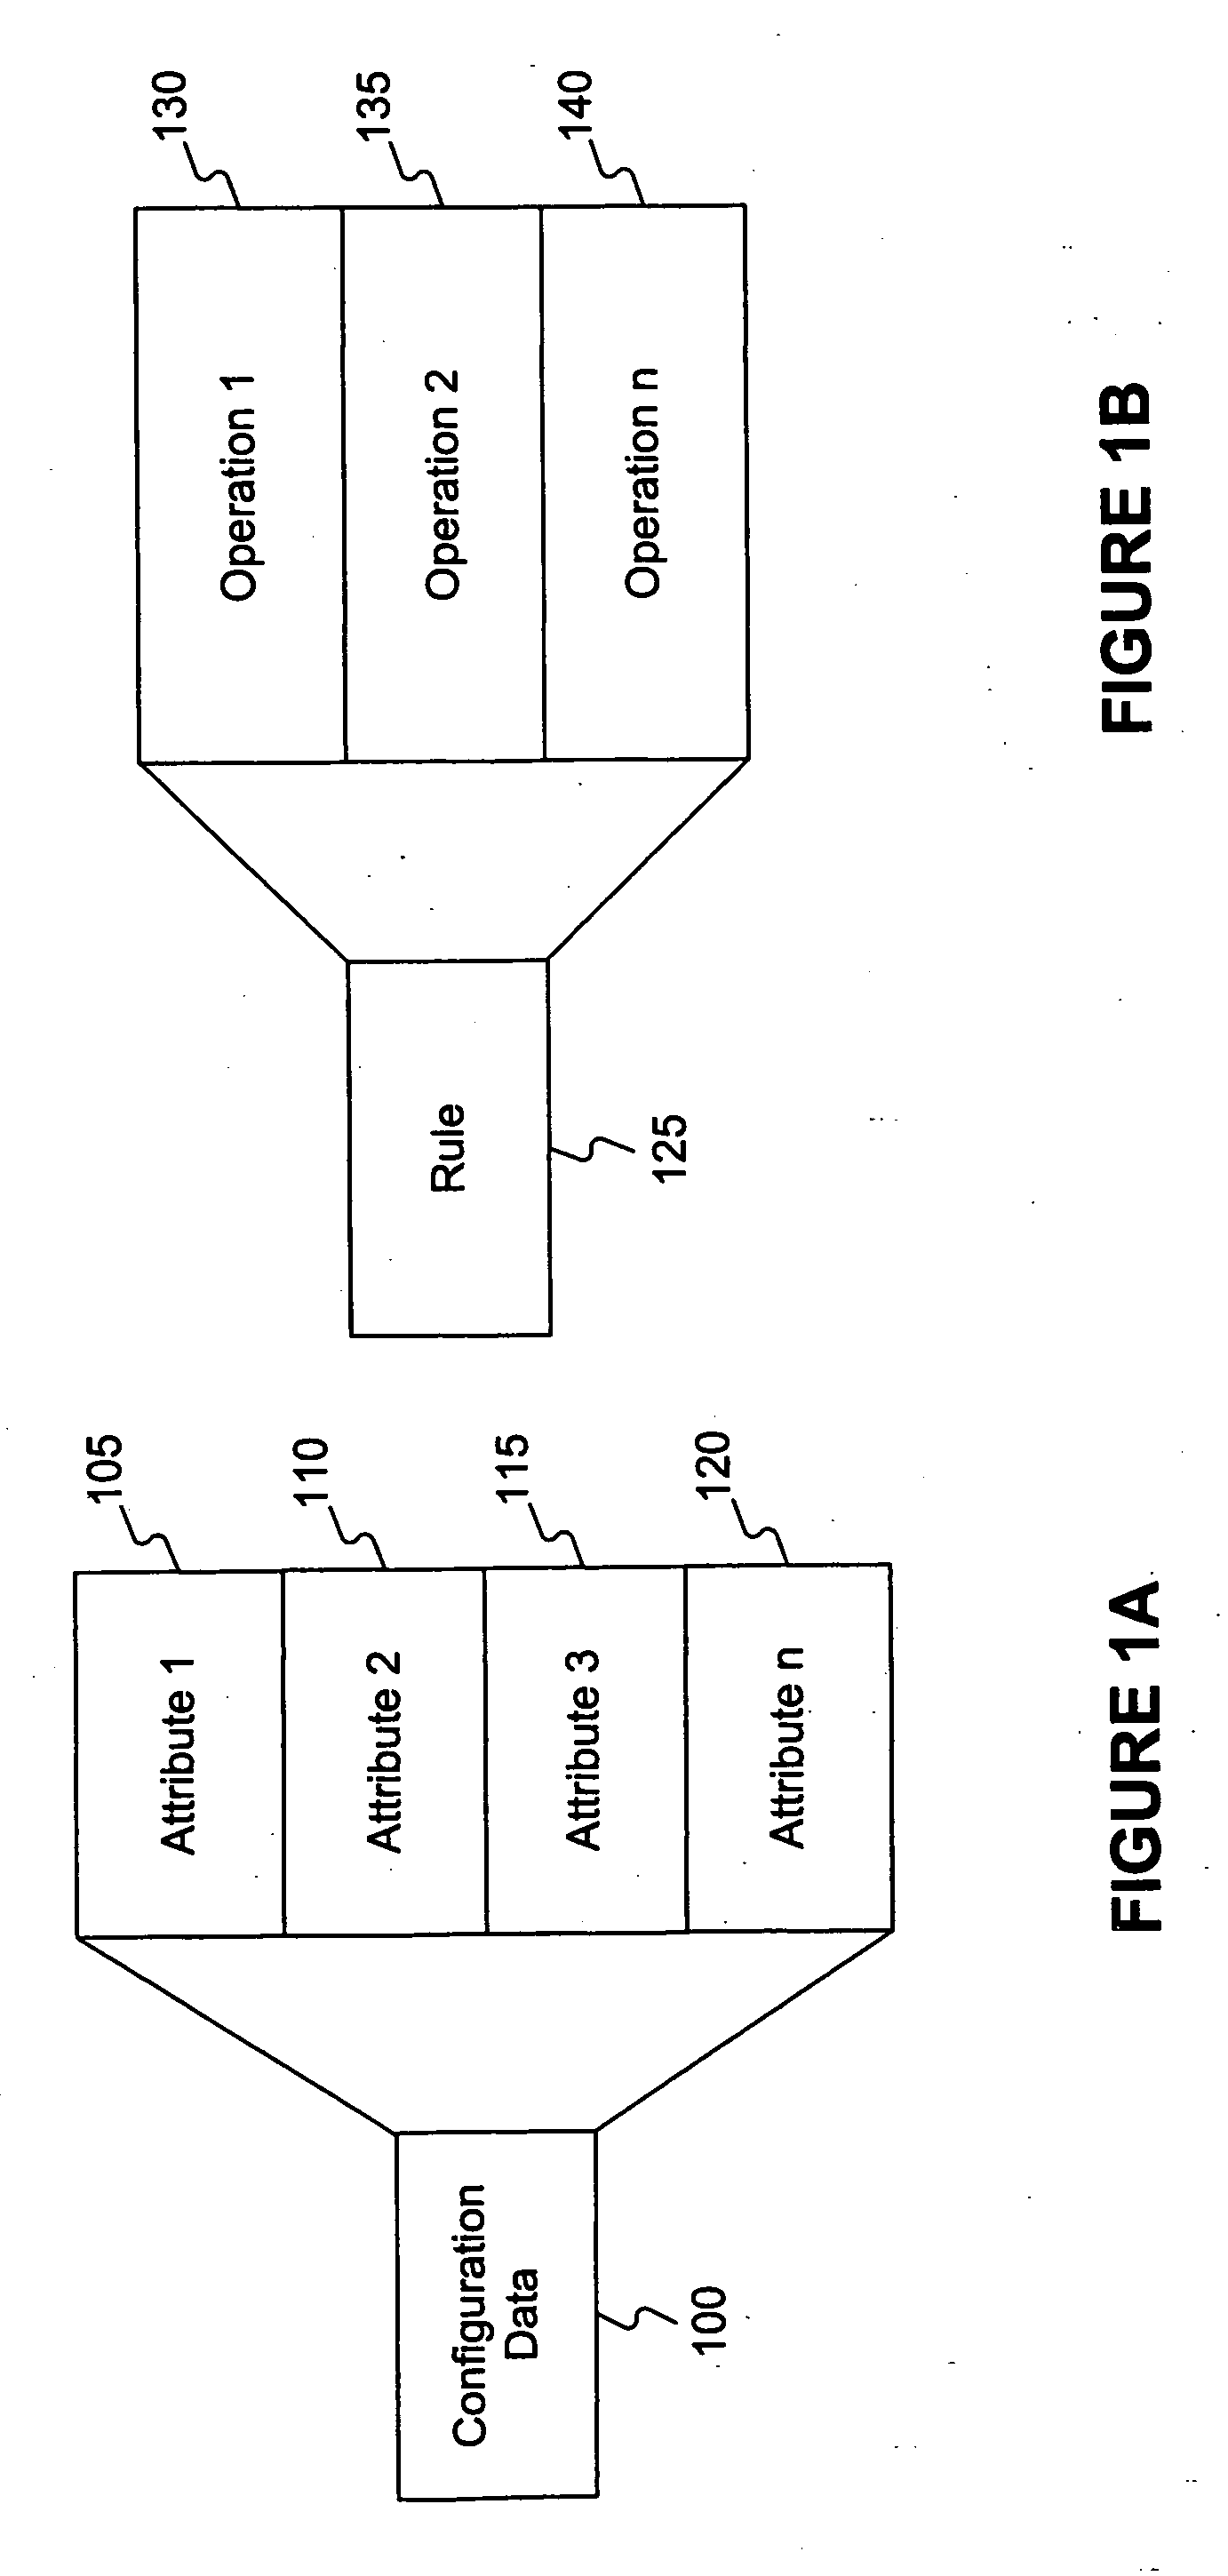 Methods of optimizing legacy application layer control structure using refactoring